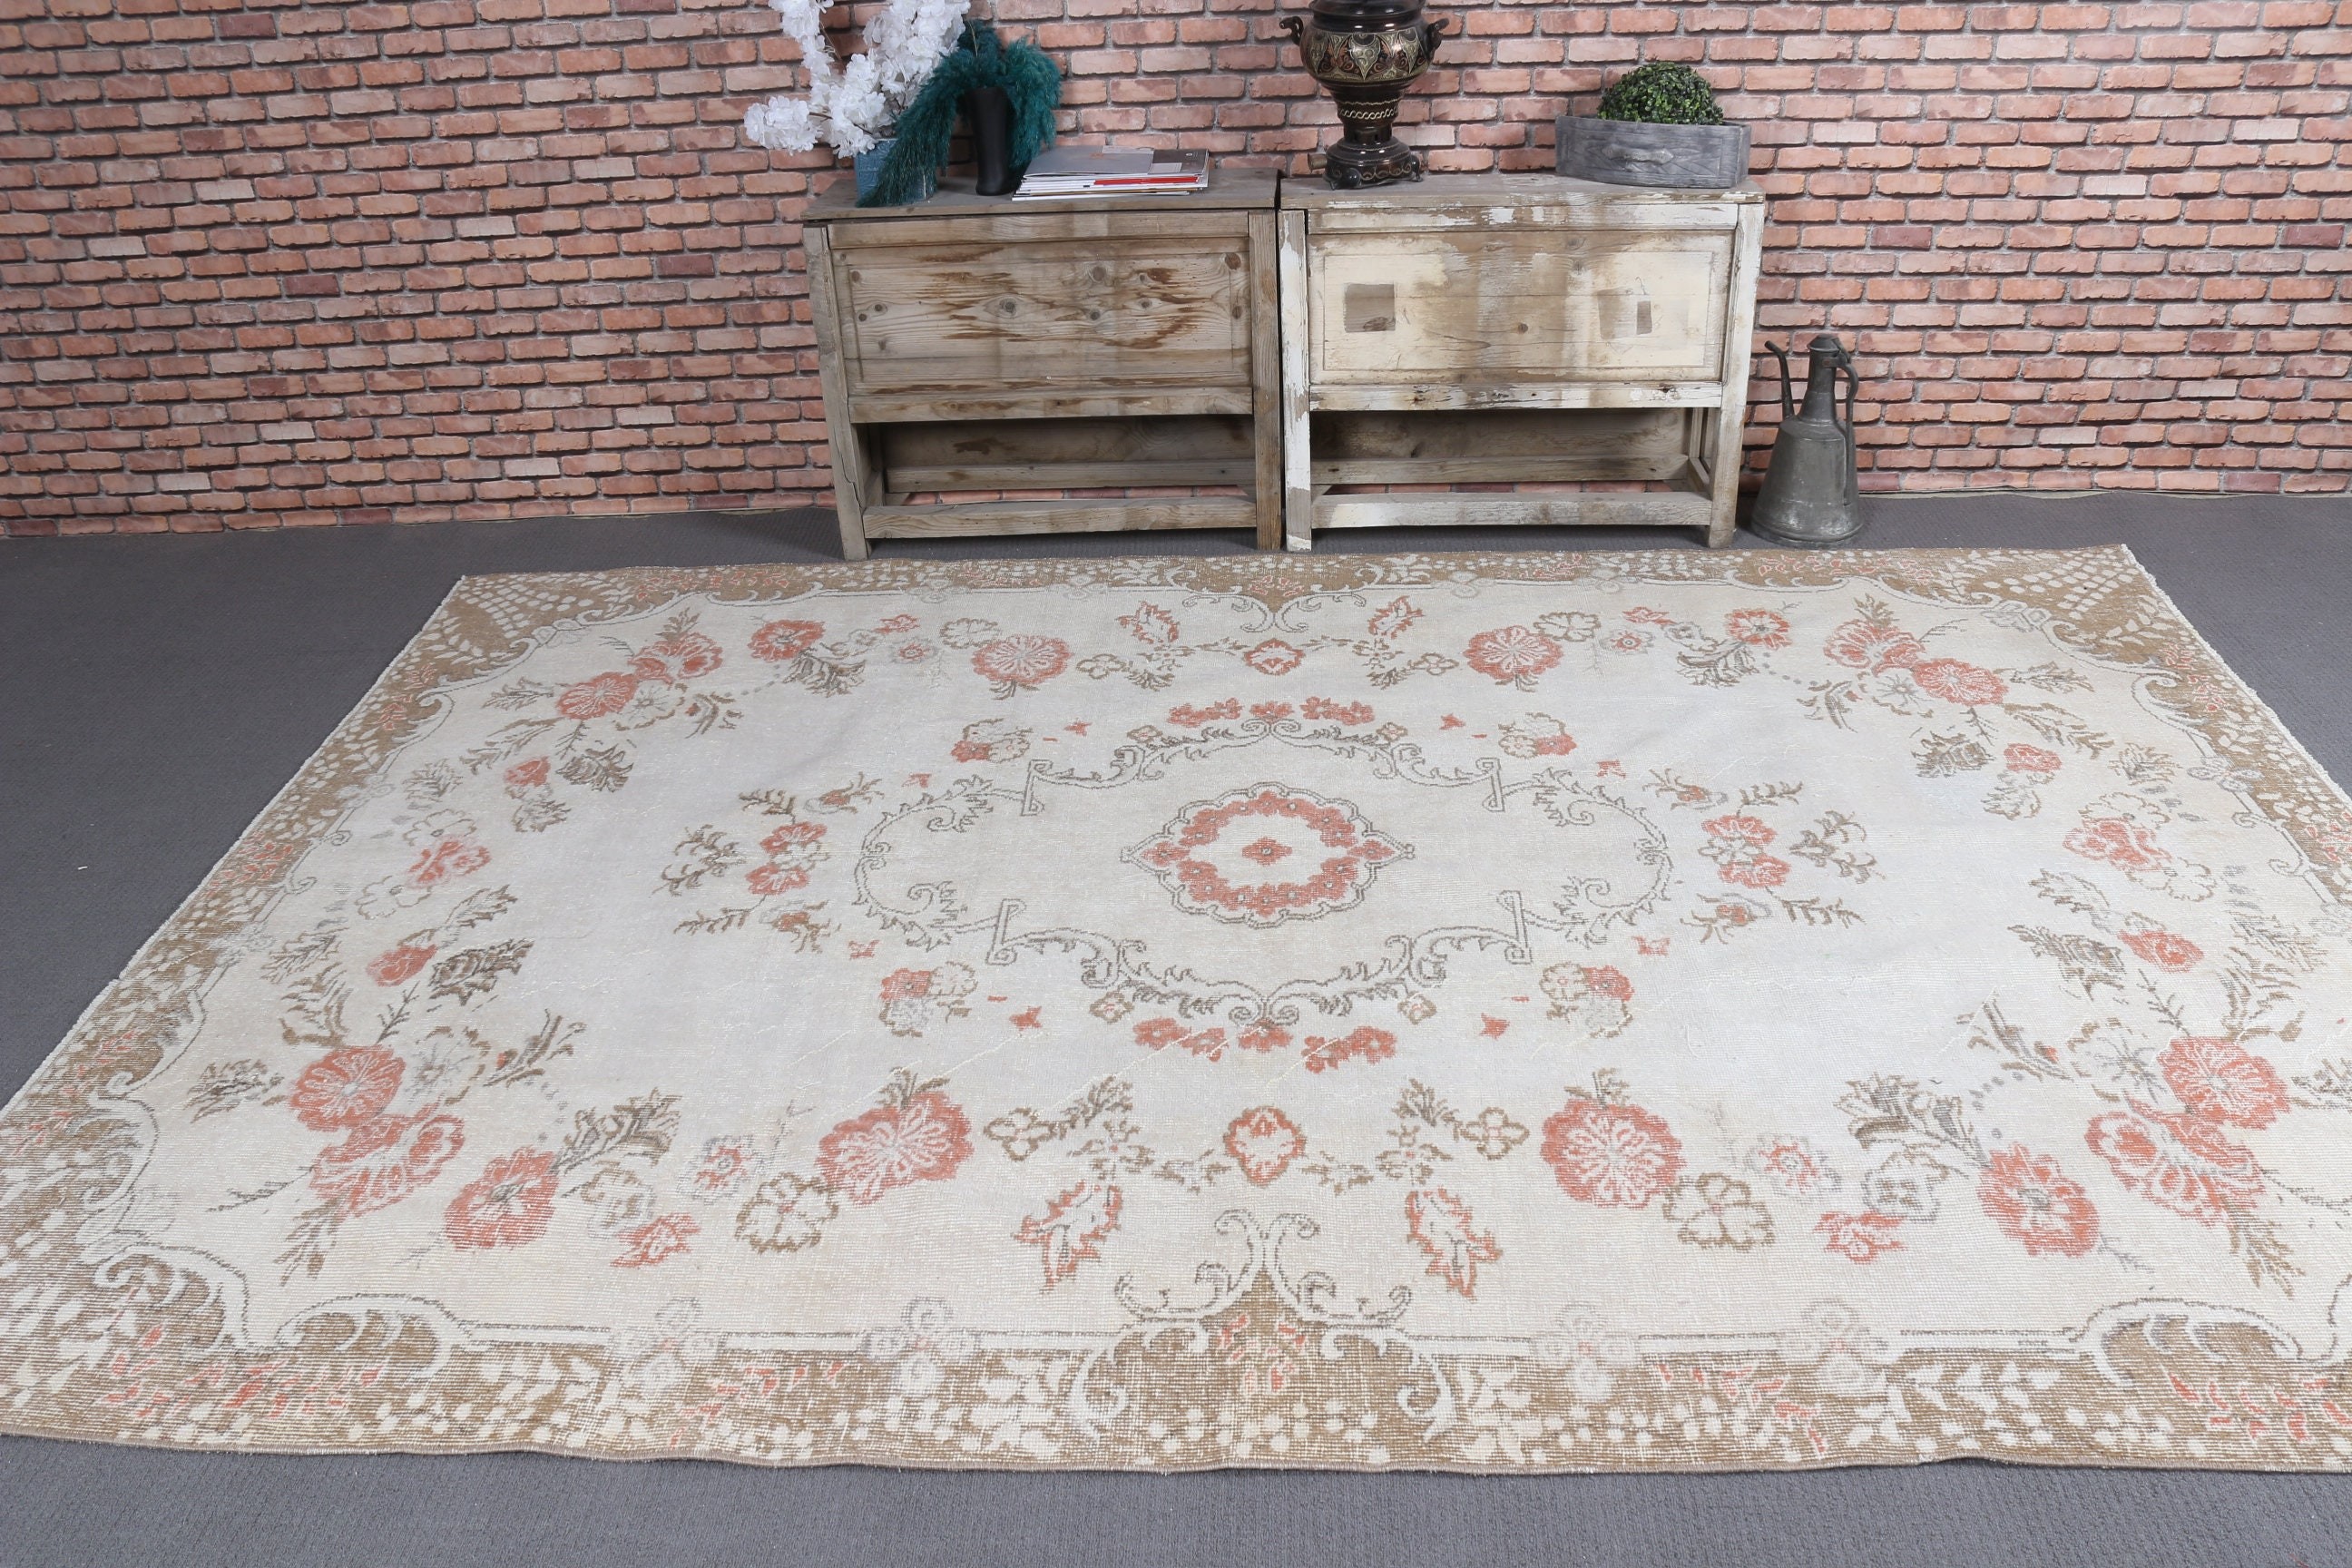 Vintage Rug, Salon Rugs, White Antique Rugs, Rugs for Salon, Turkish Rug, Cool Rugs, Home Decor Rug, Dining Room Rug, 6.7x9.7 ft Large Rug